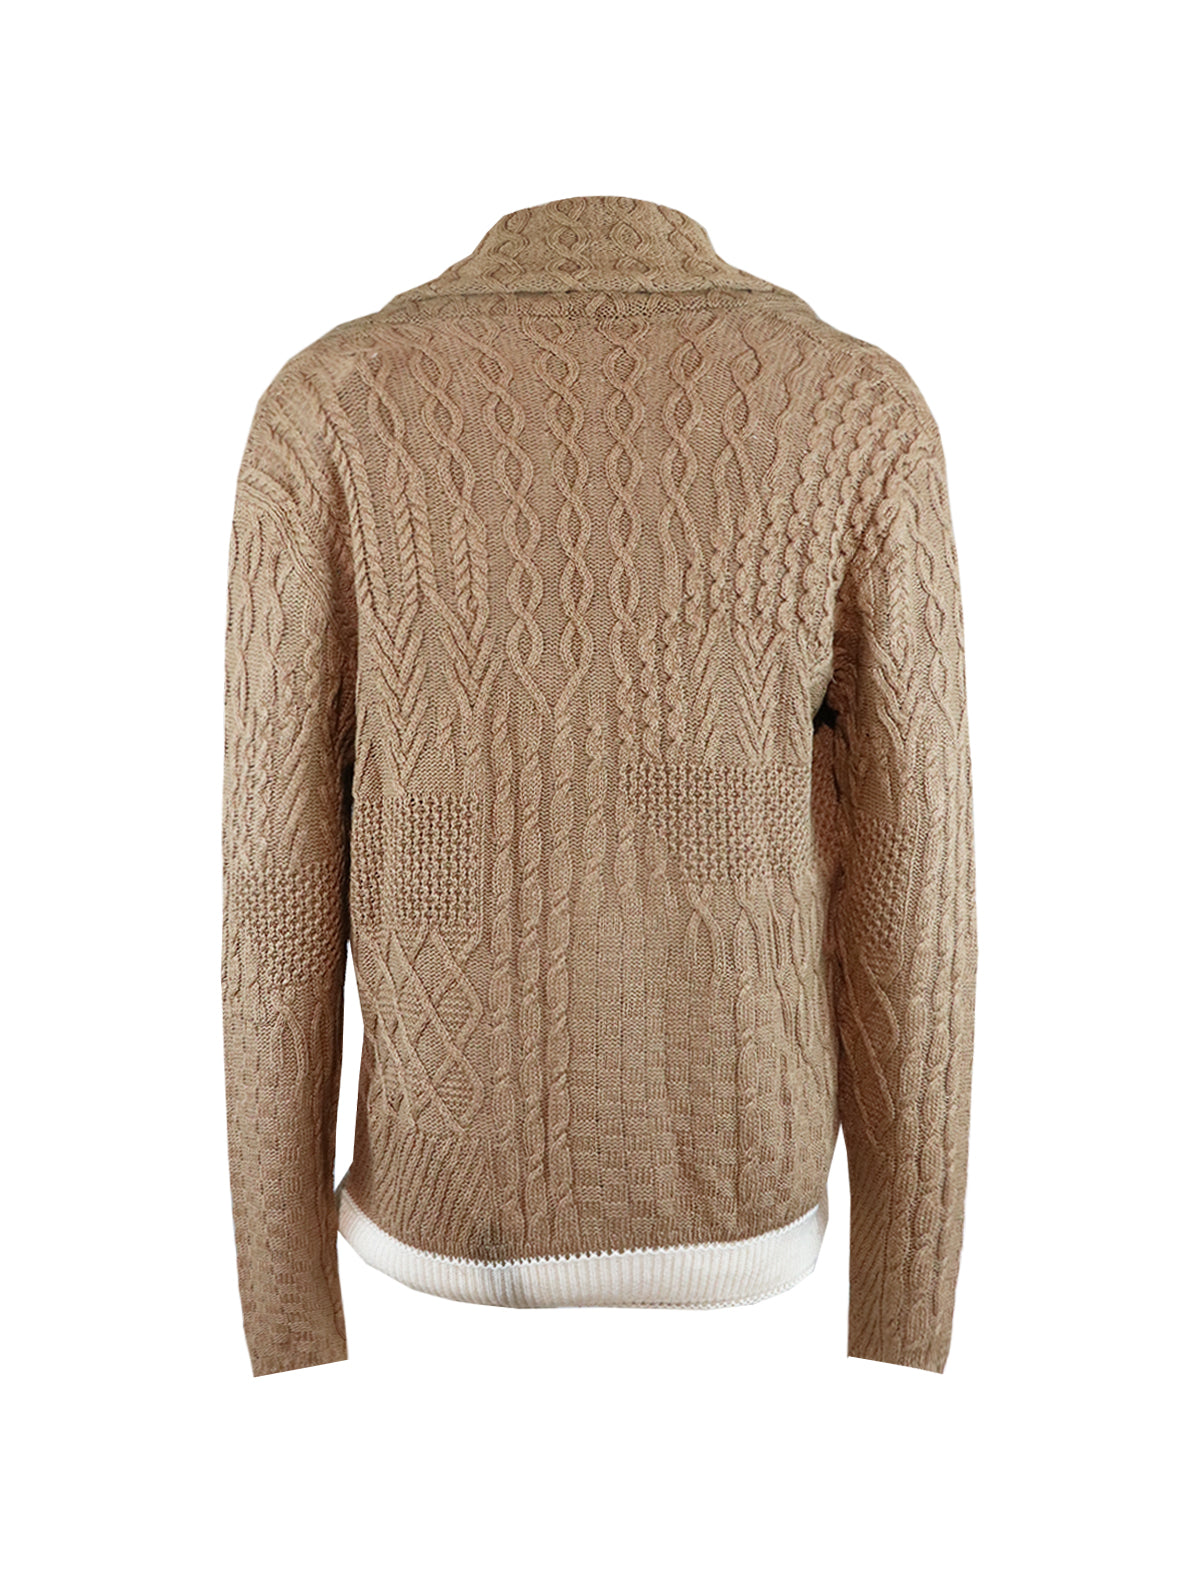 Gabriele Pasini Flax Cable Knit Cardigan in Brown/White